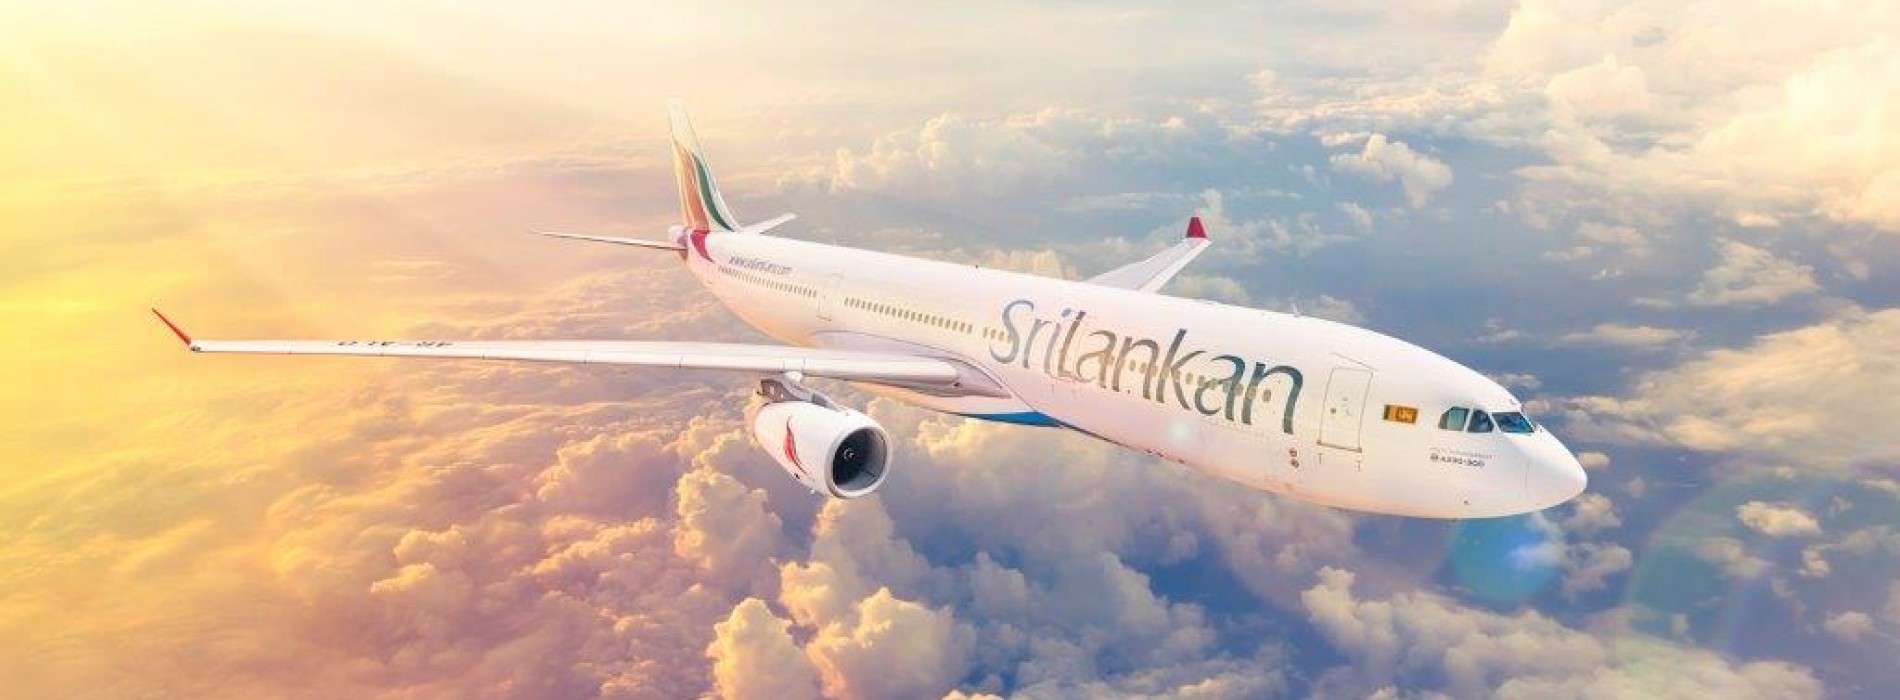 SriLankan Airlines’ Takes on Summer with Significant Frequency Increases